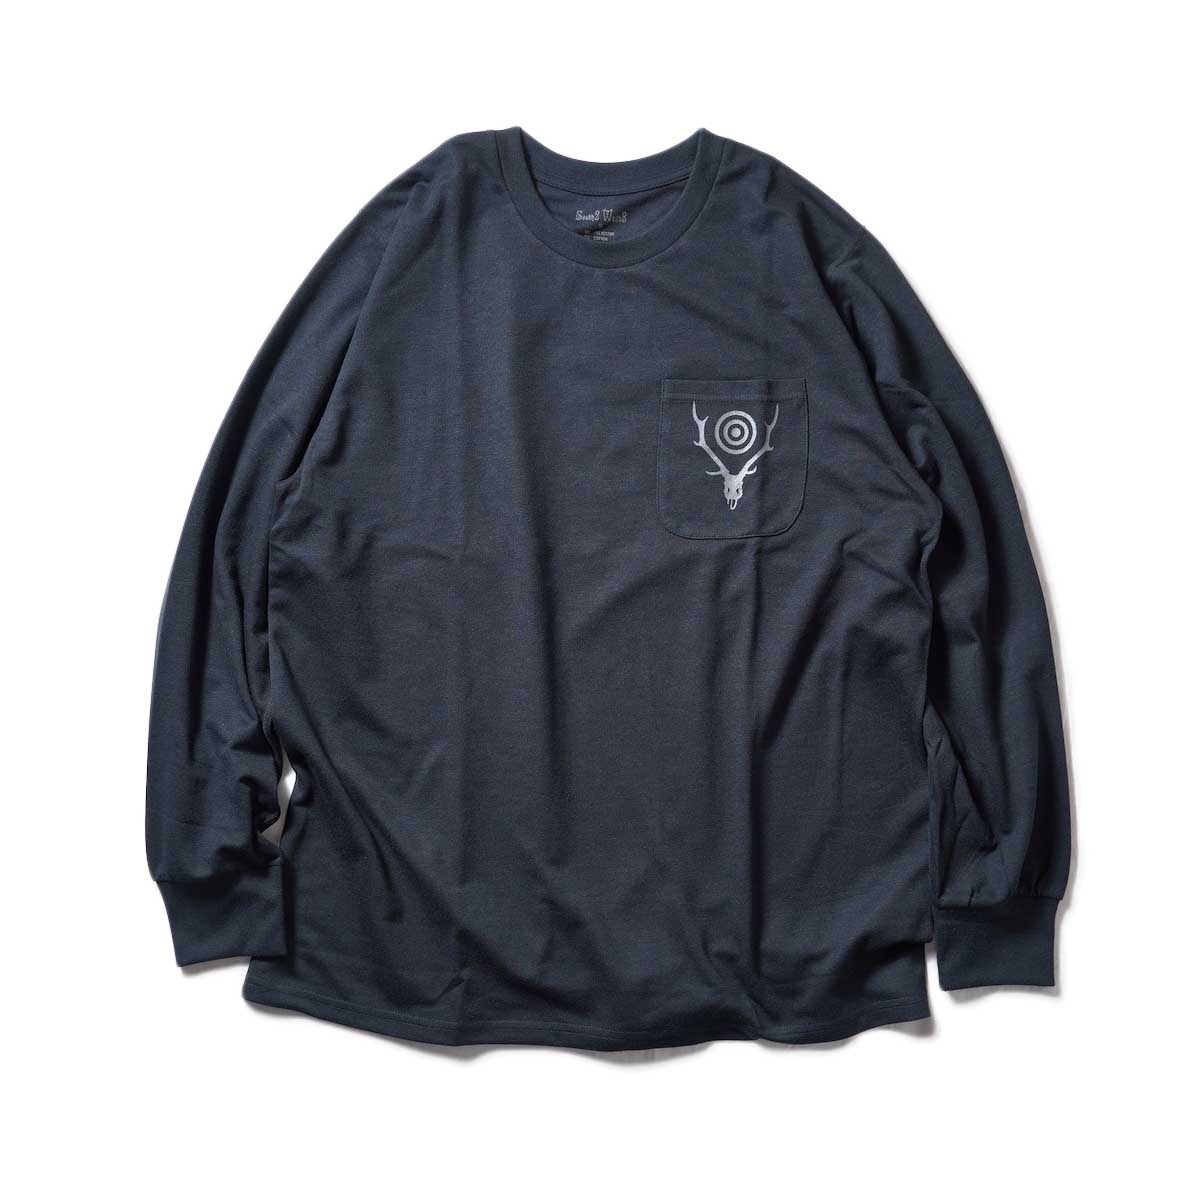 South2 West8 / L/S Round Pocket Tee -Circle Horn (Black)